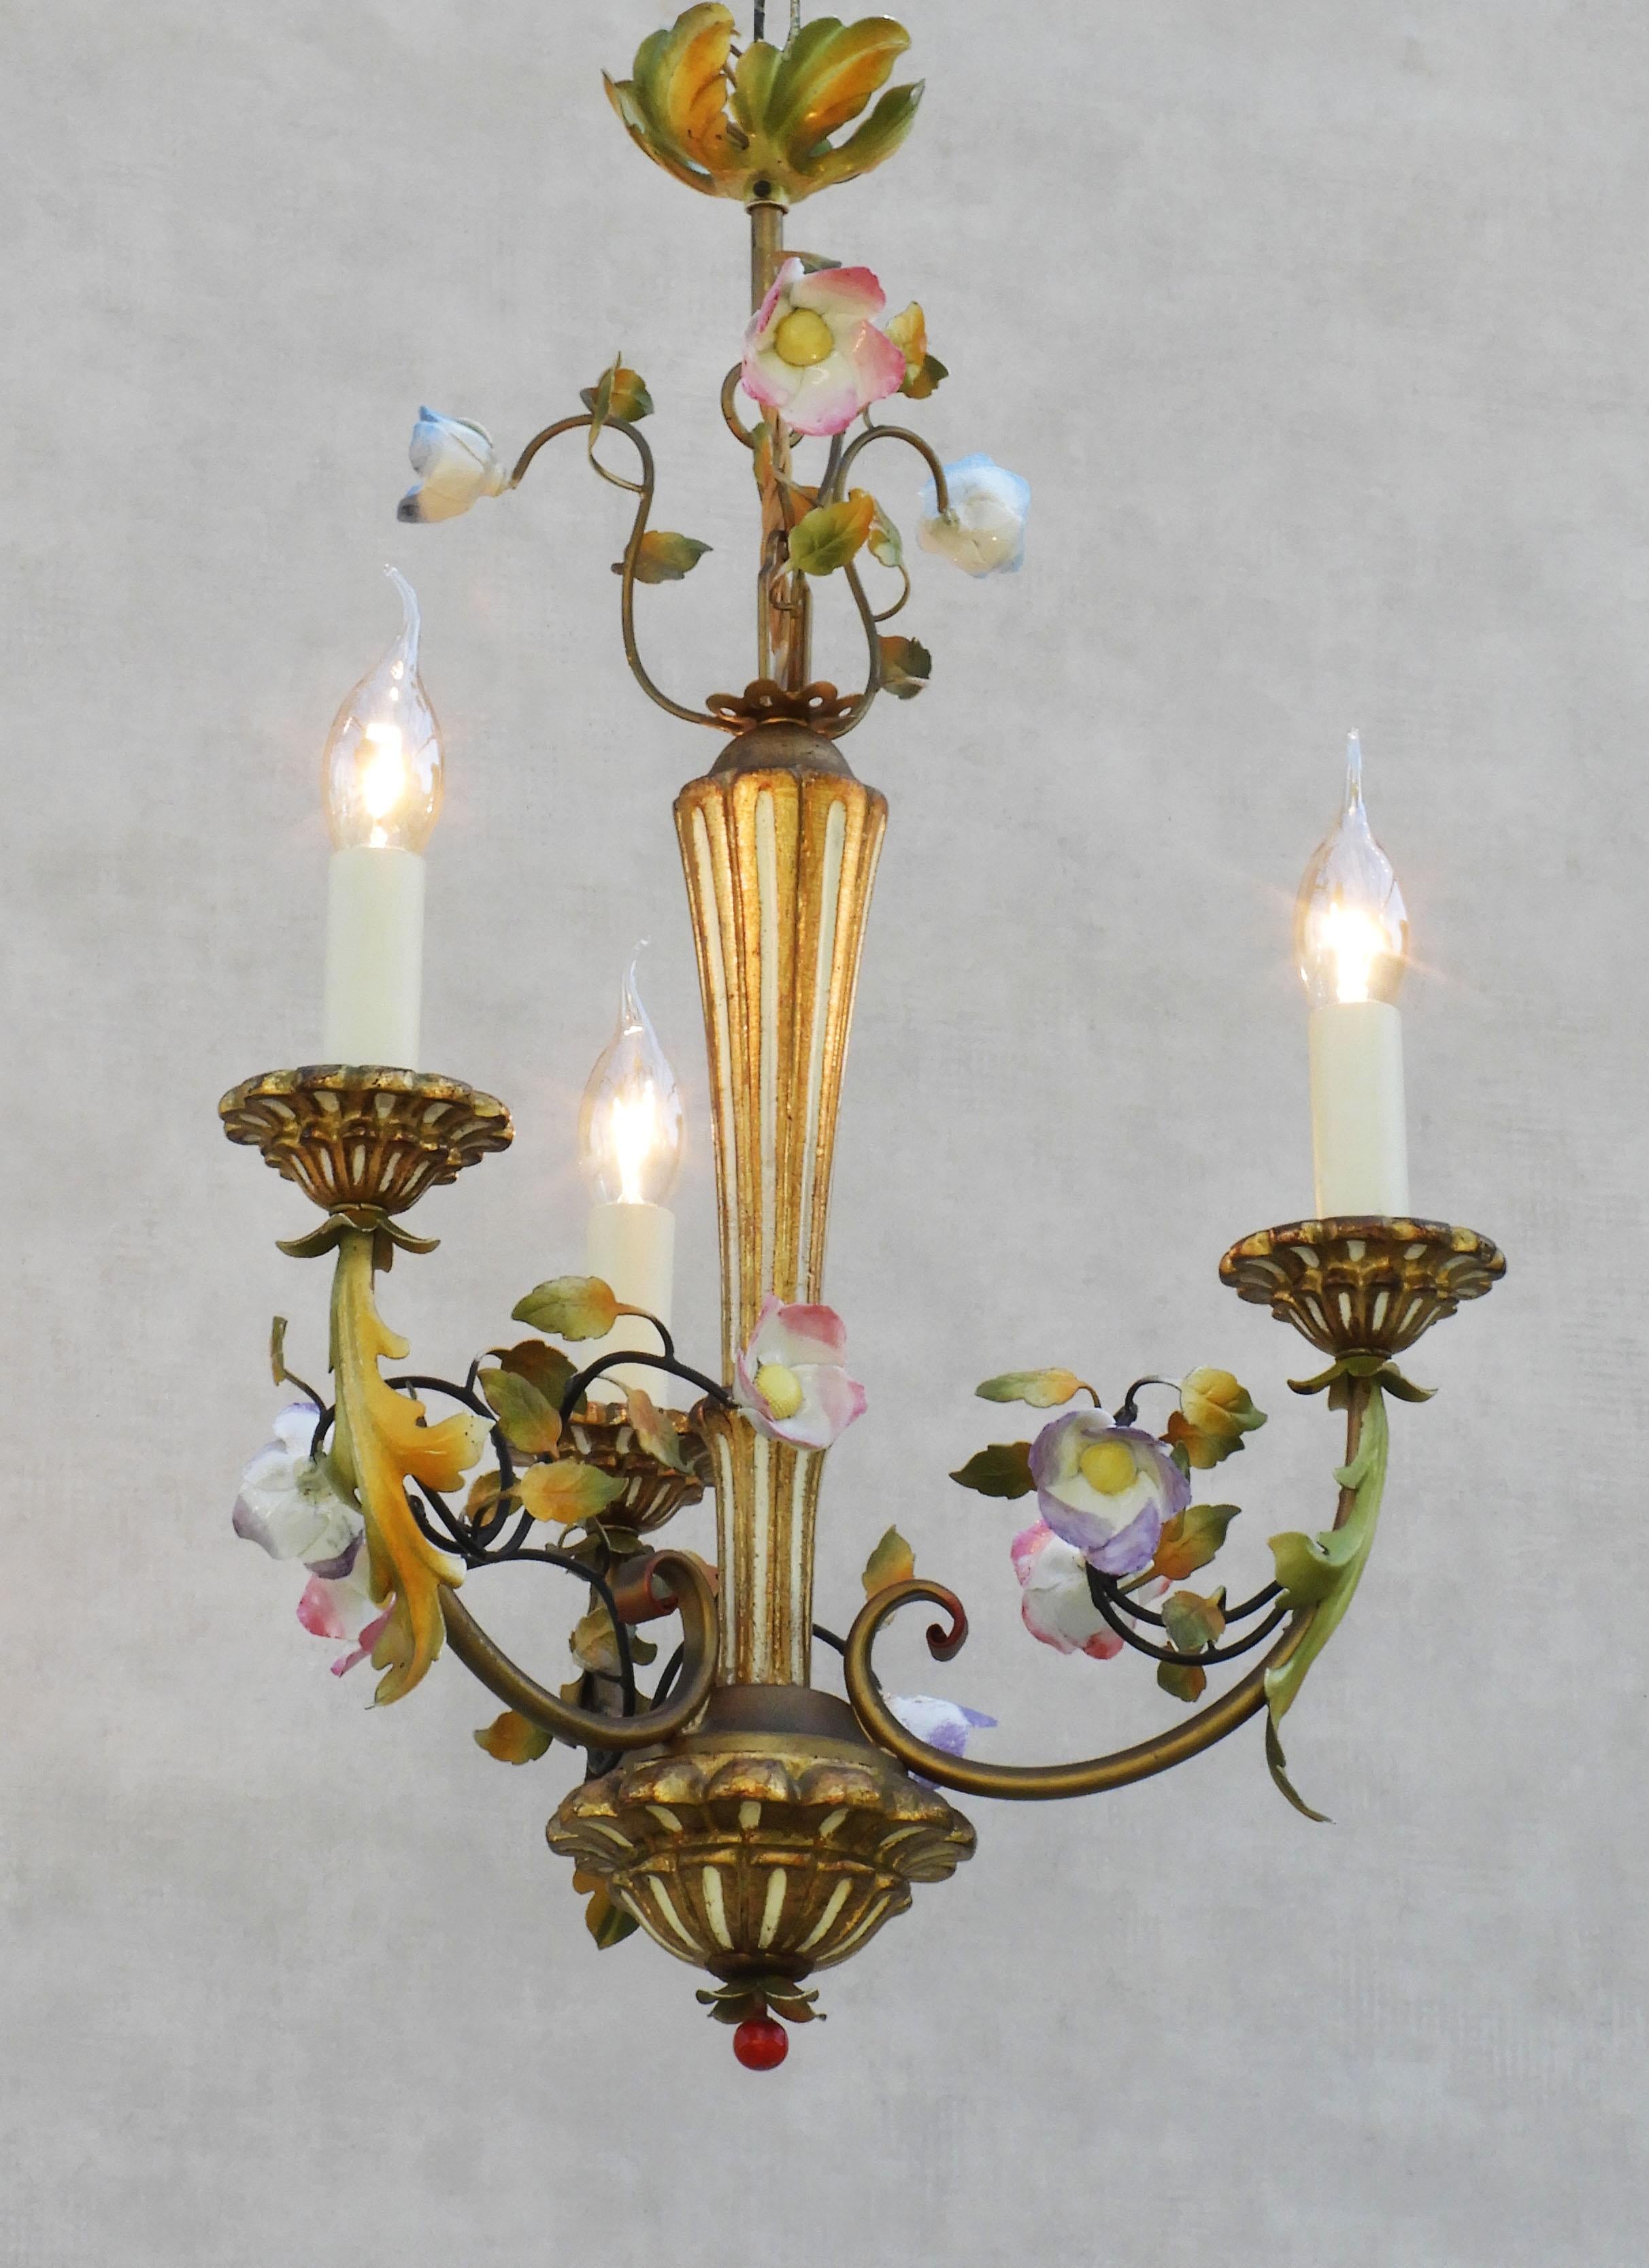 A charming French midcentury giltwood and painted tole pendant light chandelier with hand-crafted porcelain flowers. Three 'faux' candle lights on carved and gilded 'bobeches', nestling amongst green and gold foliage, surrounding a central carved